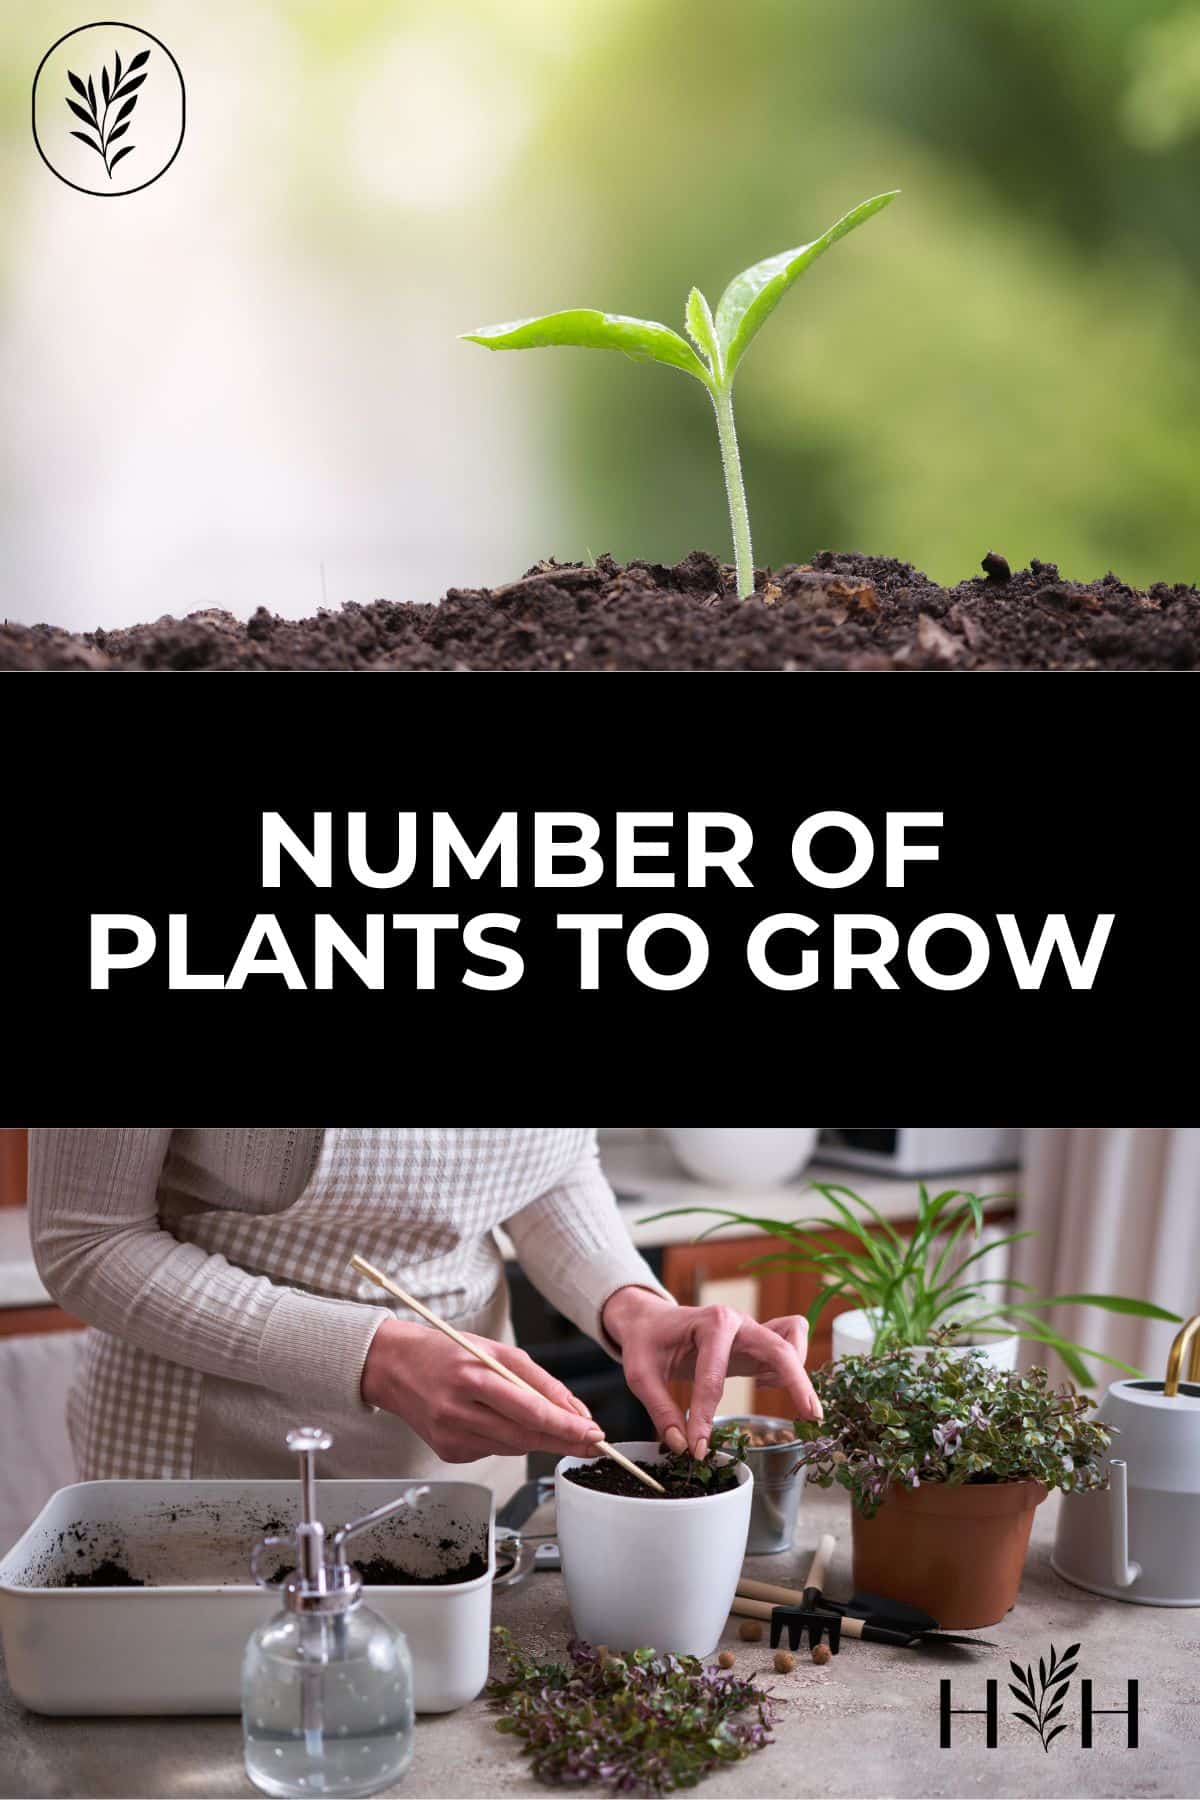 Number of plants to grow via @home4theharvest